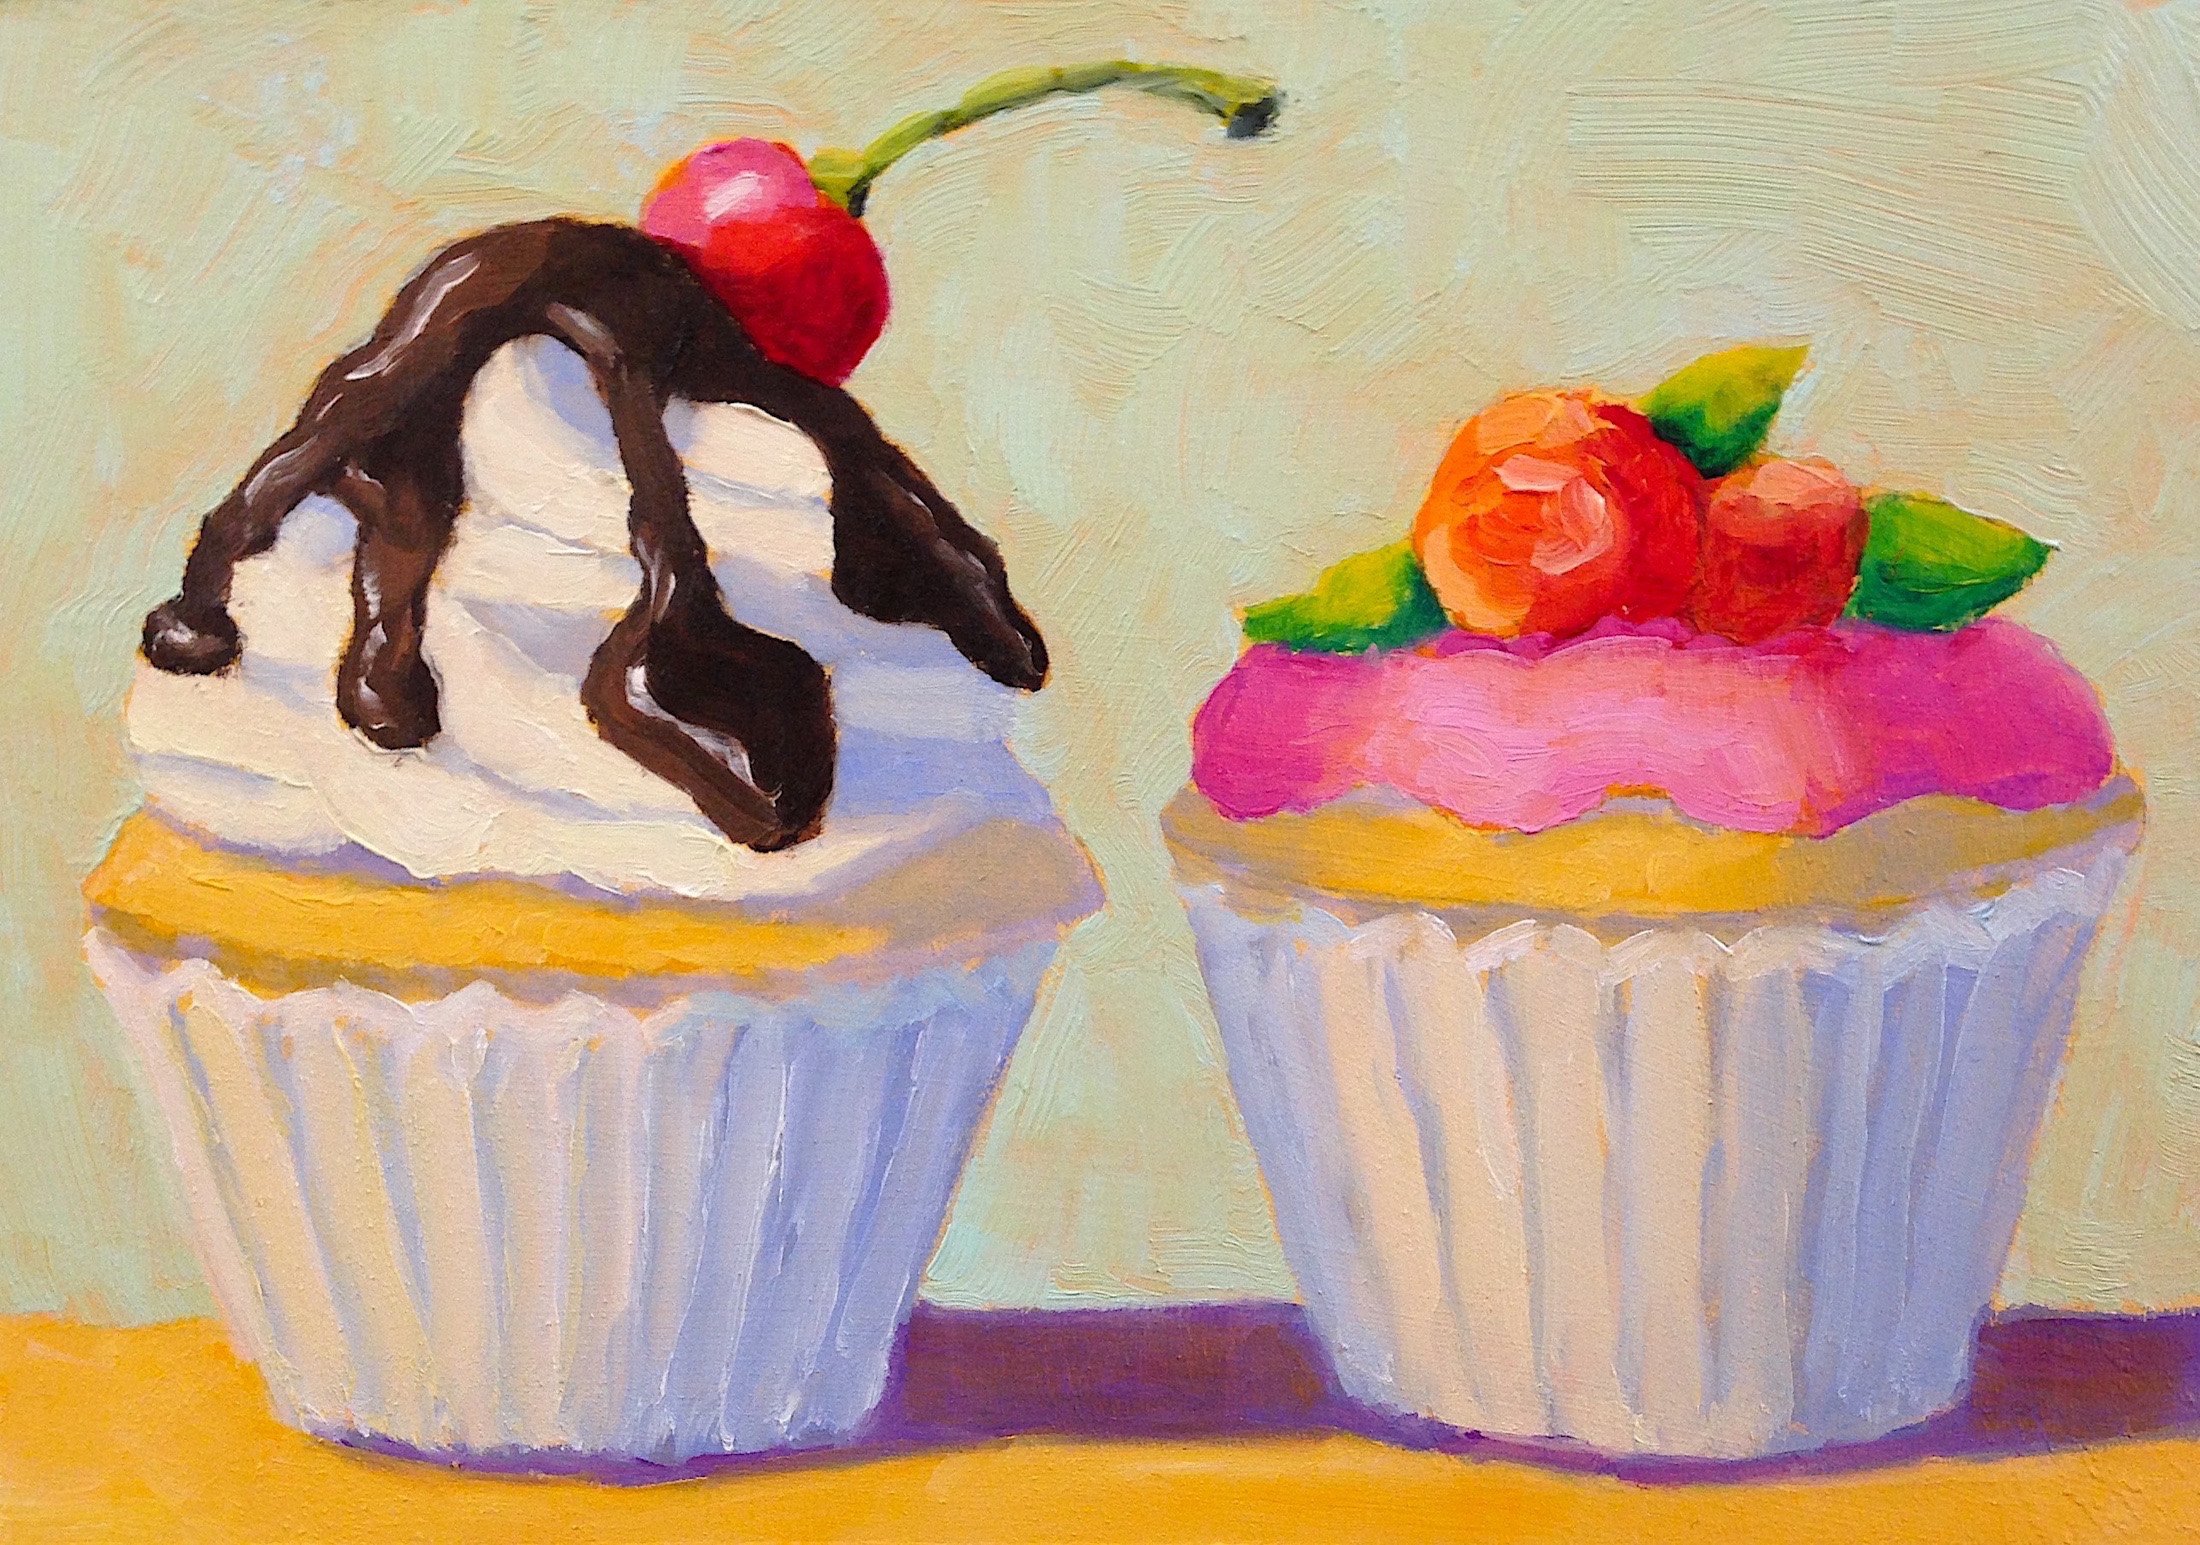 A Couple of Cupcakes by Pat Doherty